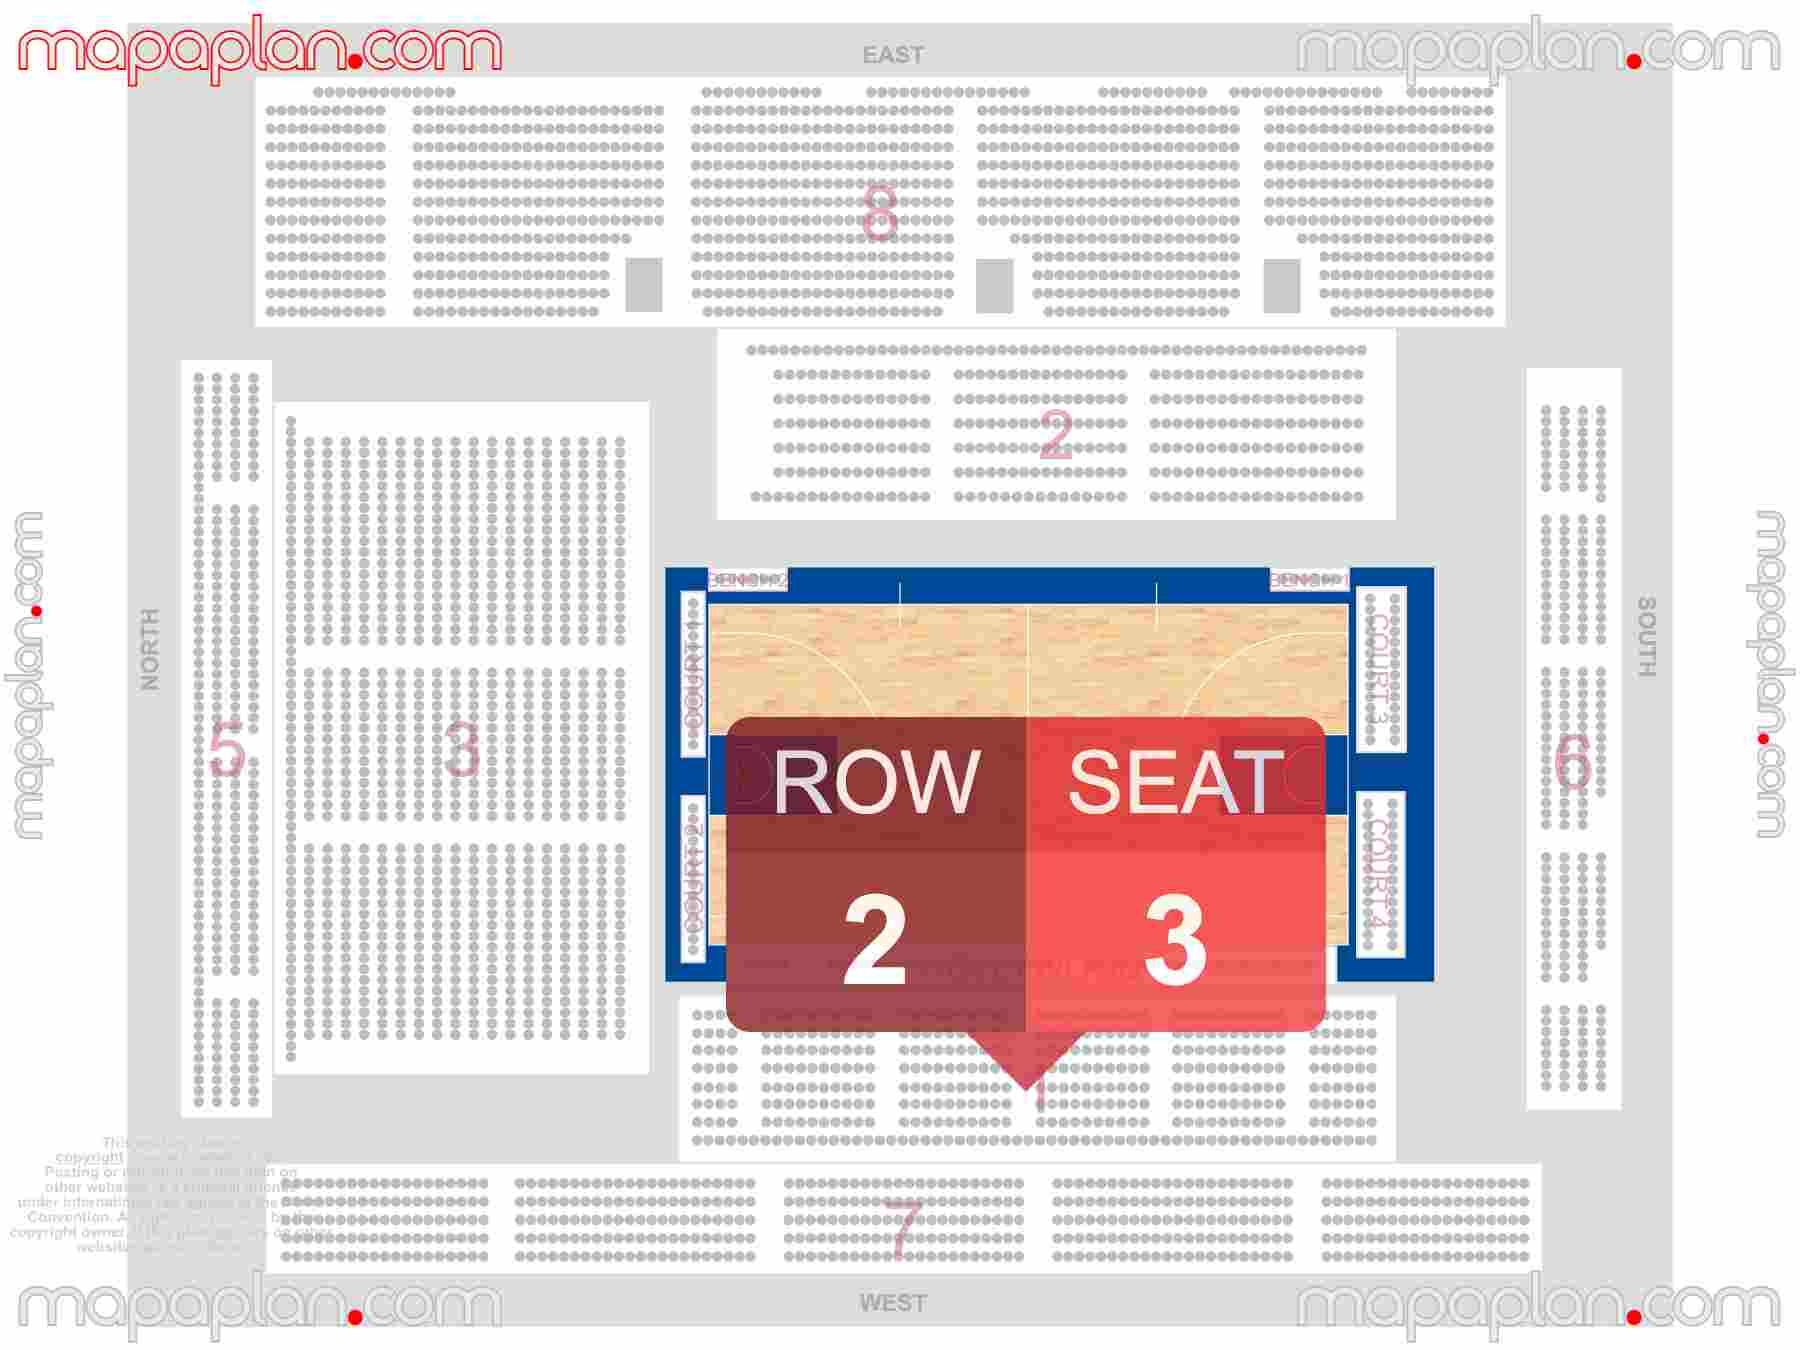 Wellington TSB Arena seating map Basketball inside capacity view arrangement plan - Interactive virtual 3d best seats & rows detailed stadium image configuration layout